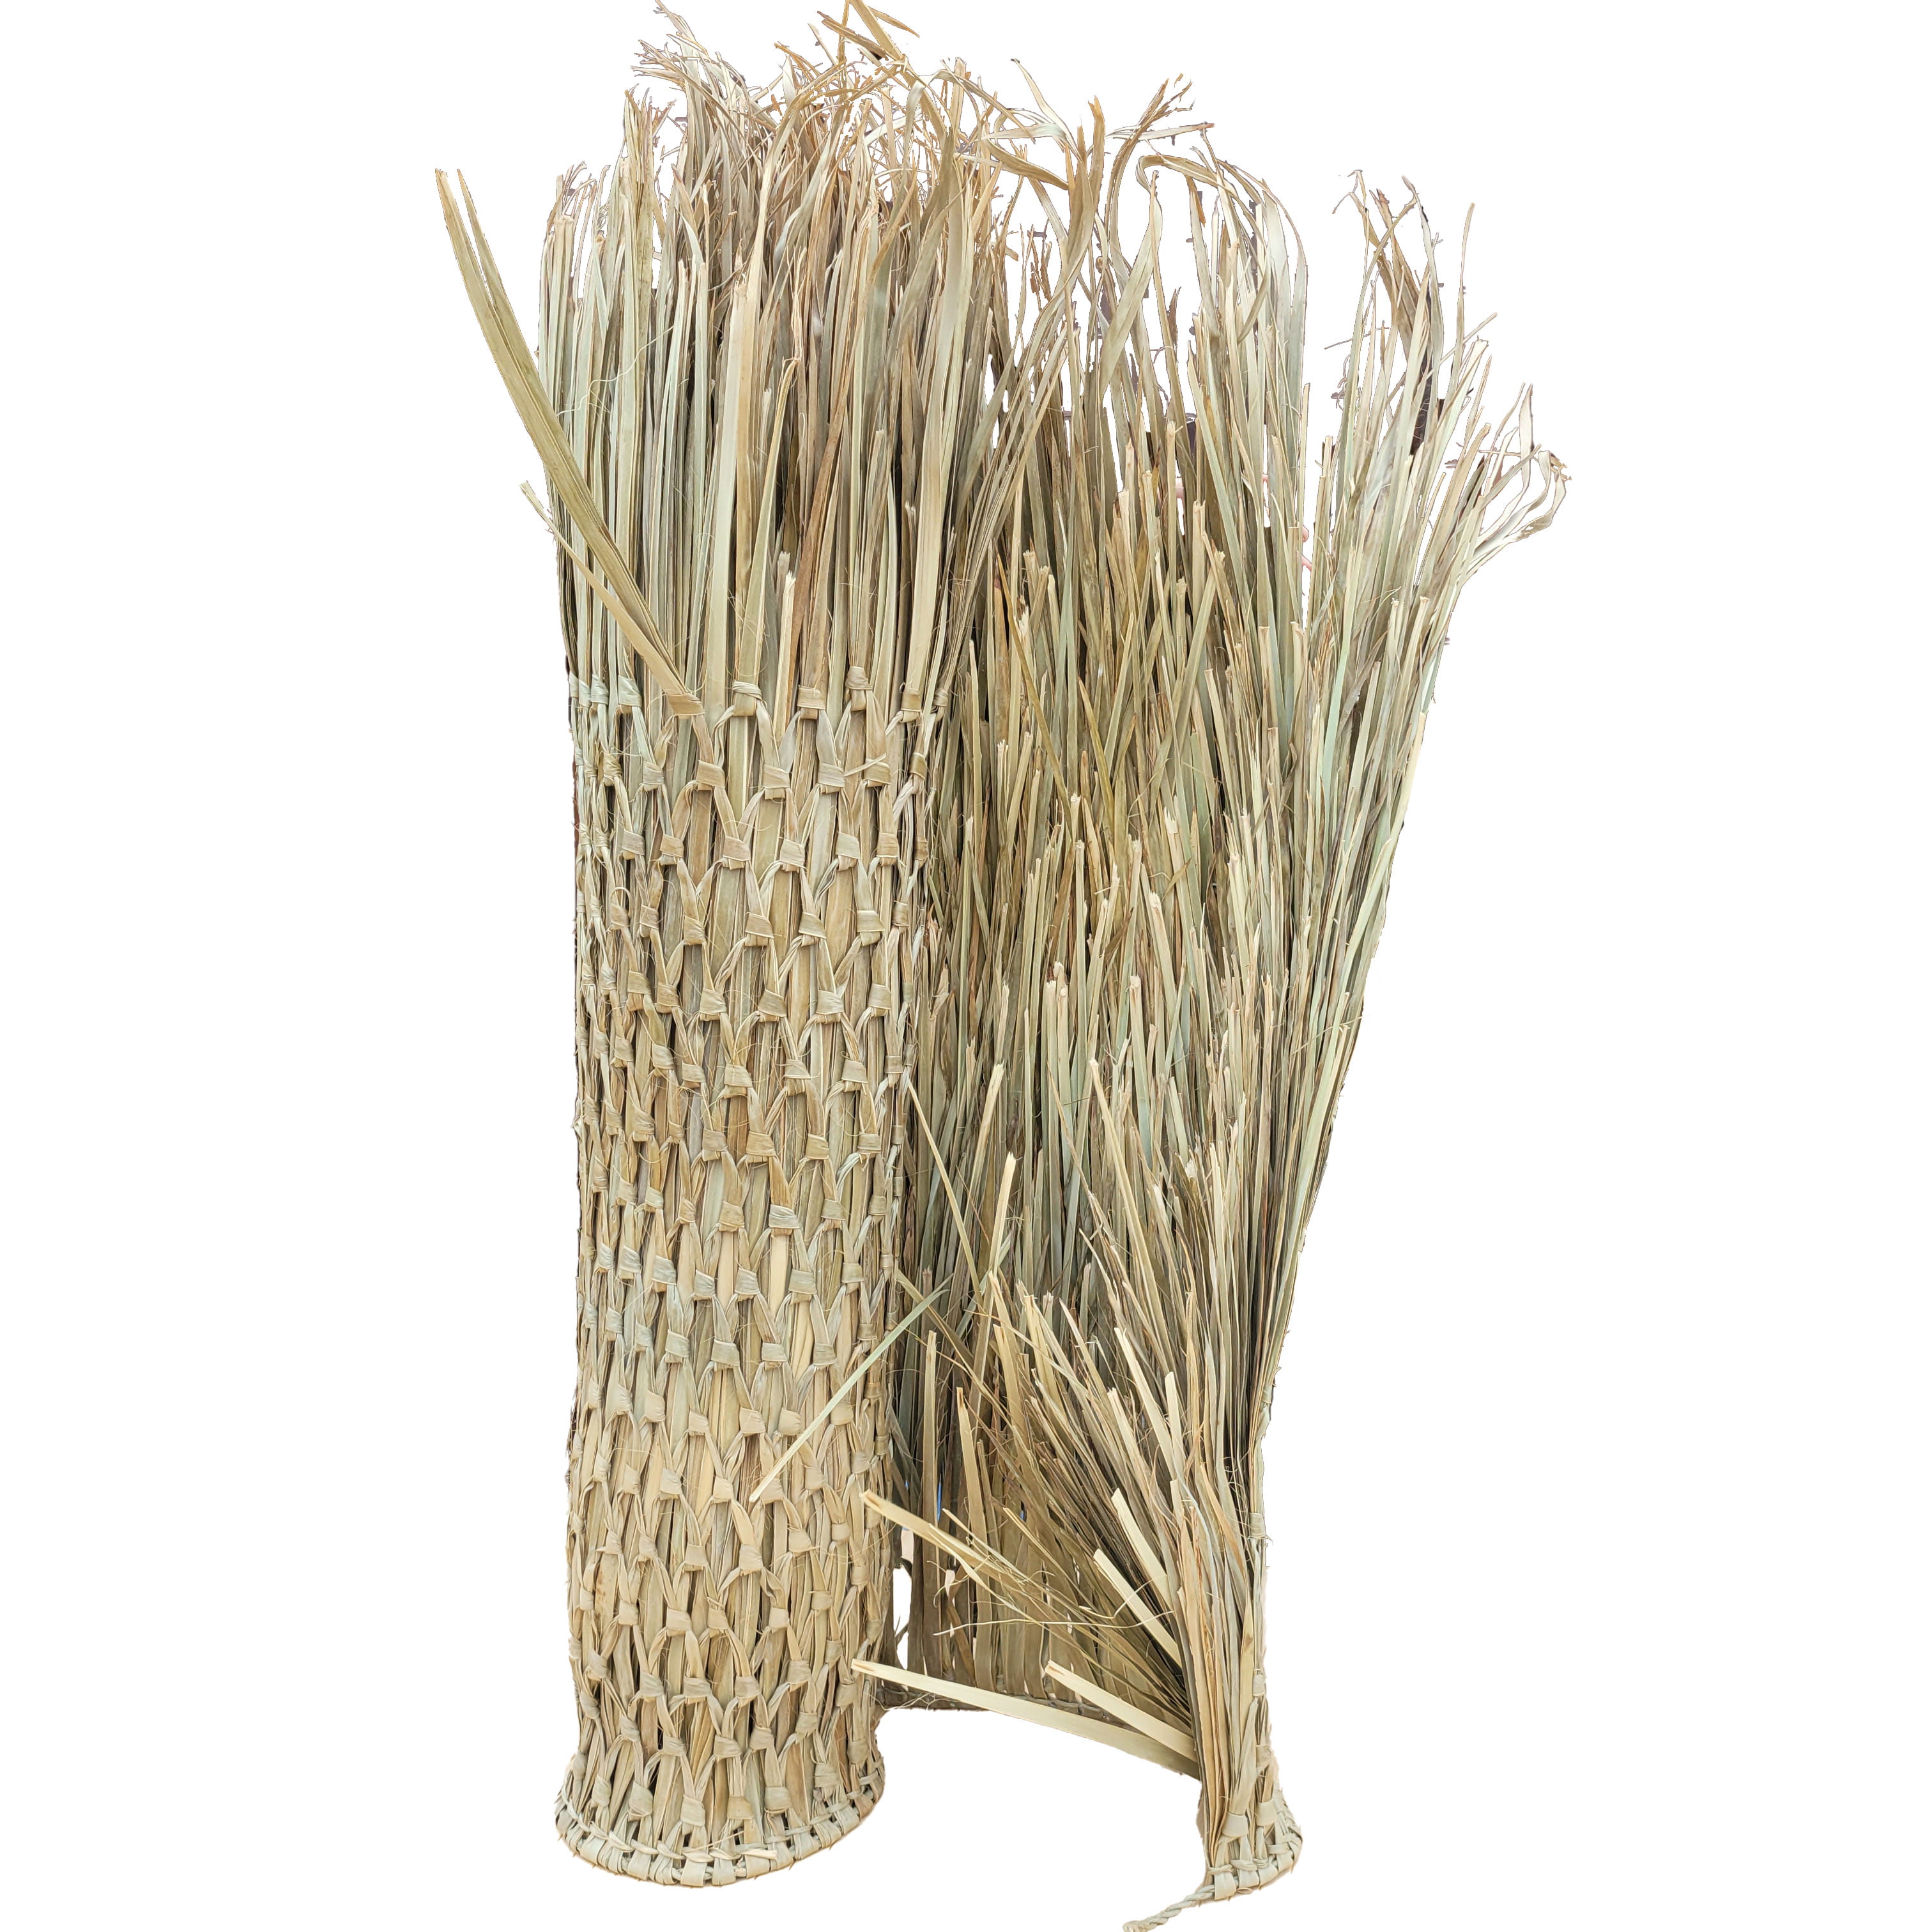 Forever Bamboo Premium Duck Blind Mexican Thatch Tiki Grass Roll 35" H x 60' L 